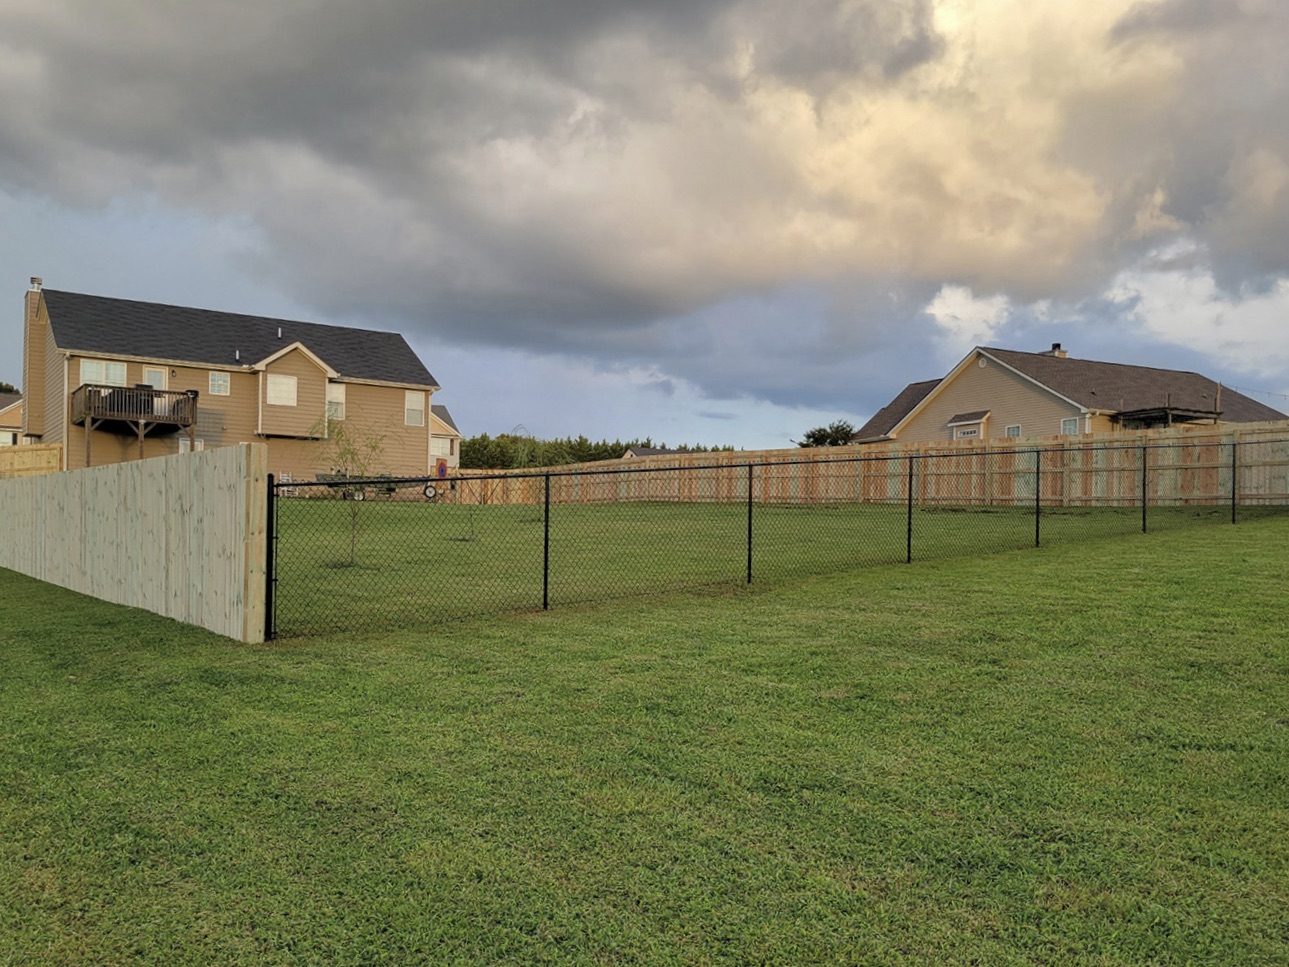 Photo of a Georgia residential fence